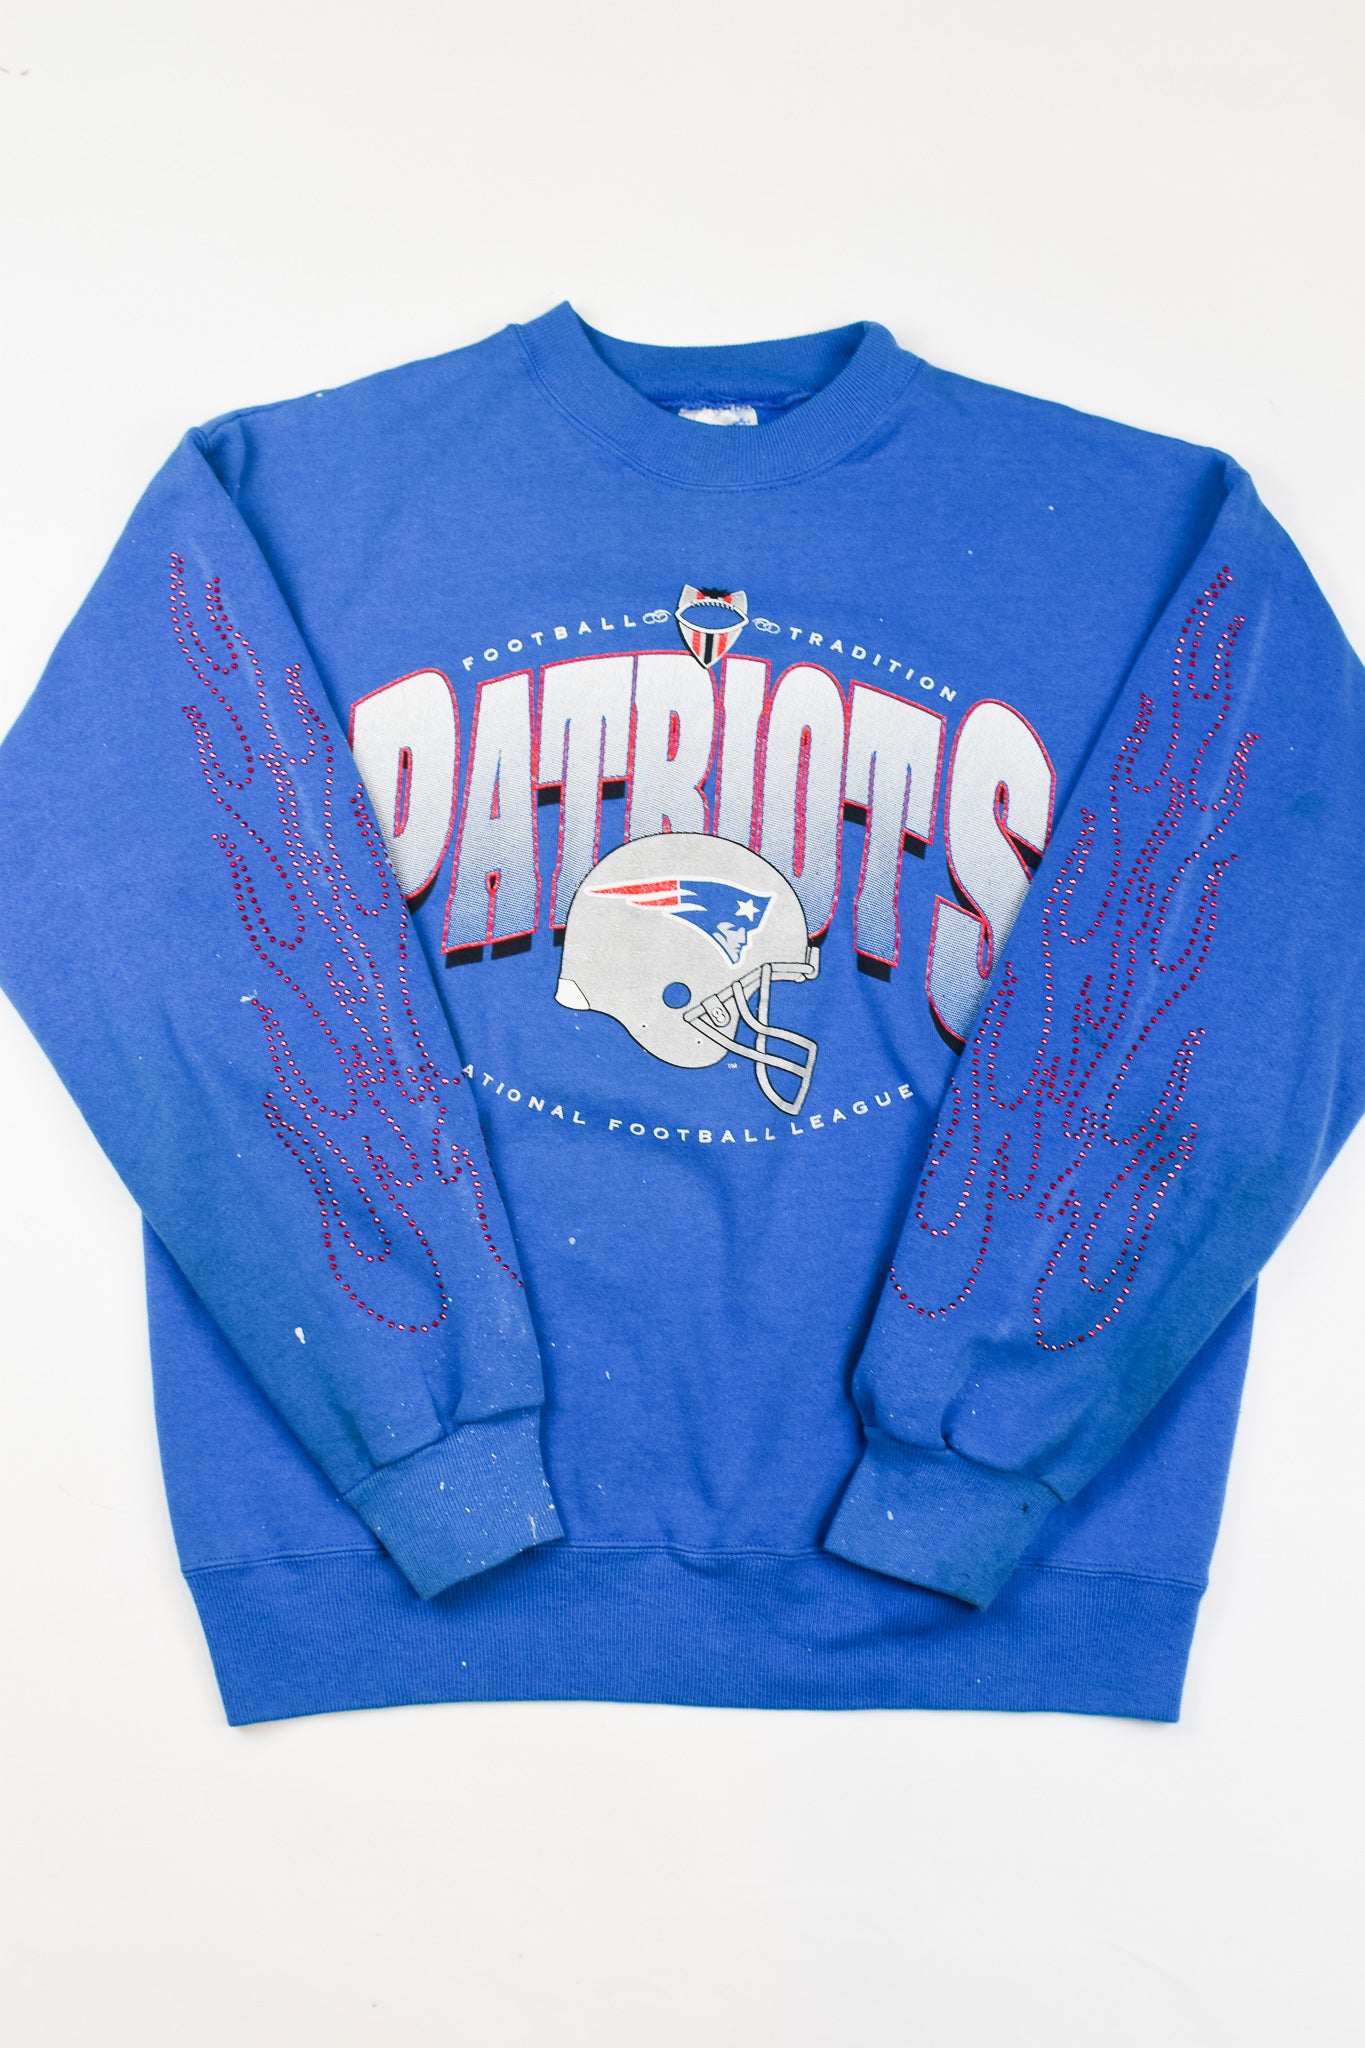 Upcycled Vintage Patriots Flame Sweatshirt - Tonguetied Apparel